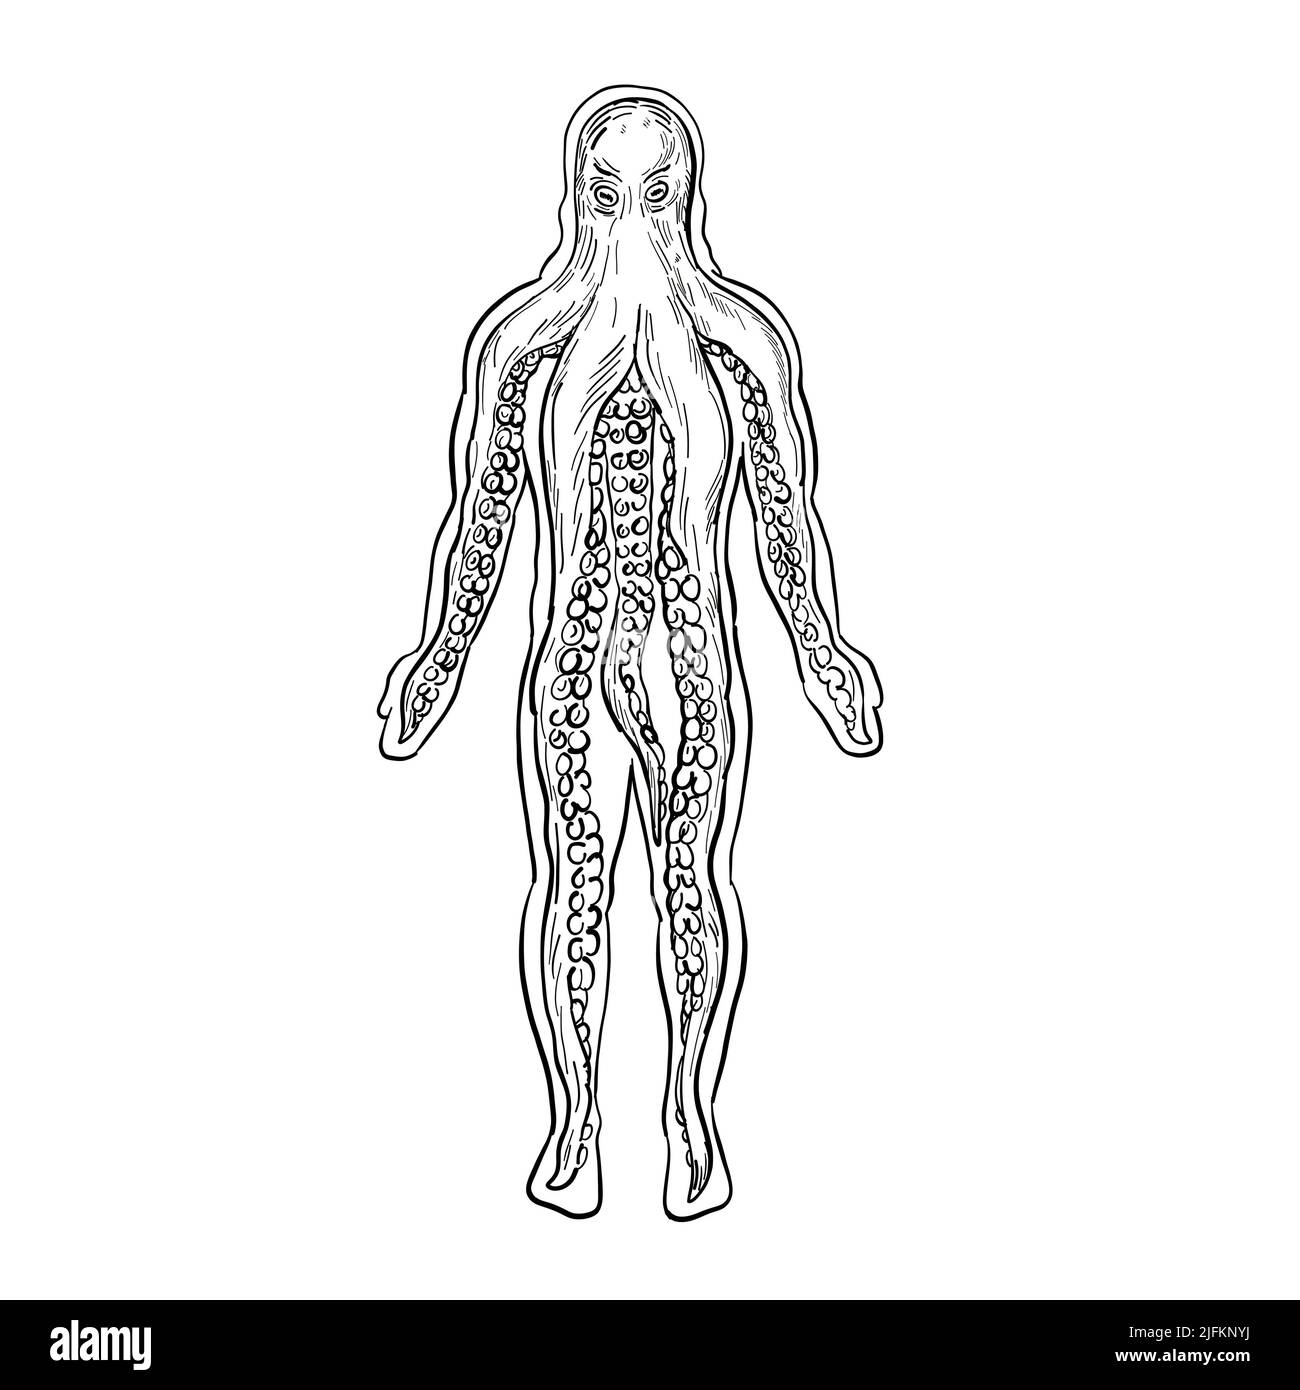 Drawing sketch style illustration of an alien octopus inside a human body and taking over it viewed from front on isolated white background in black Stock Photo